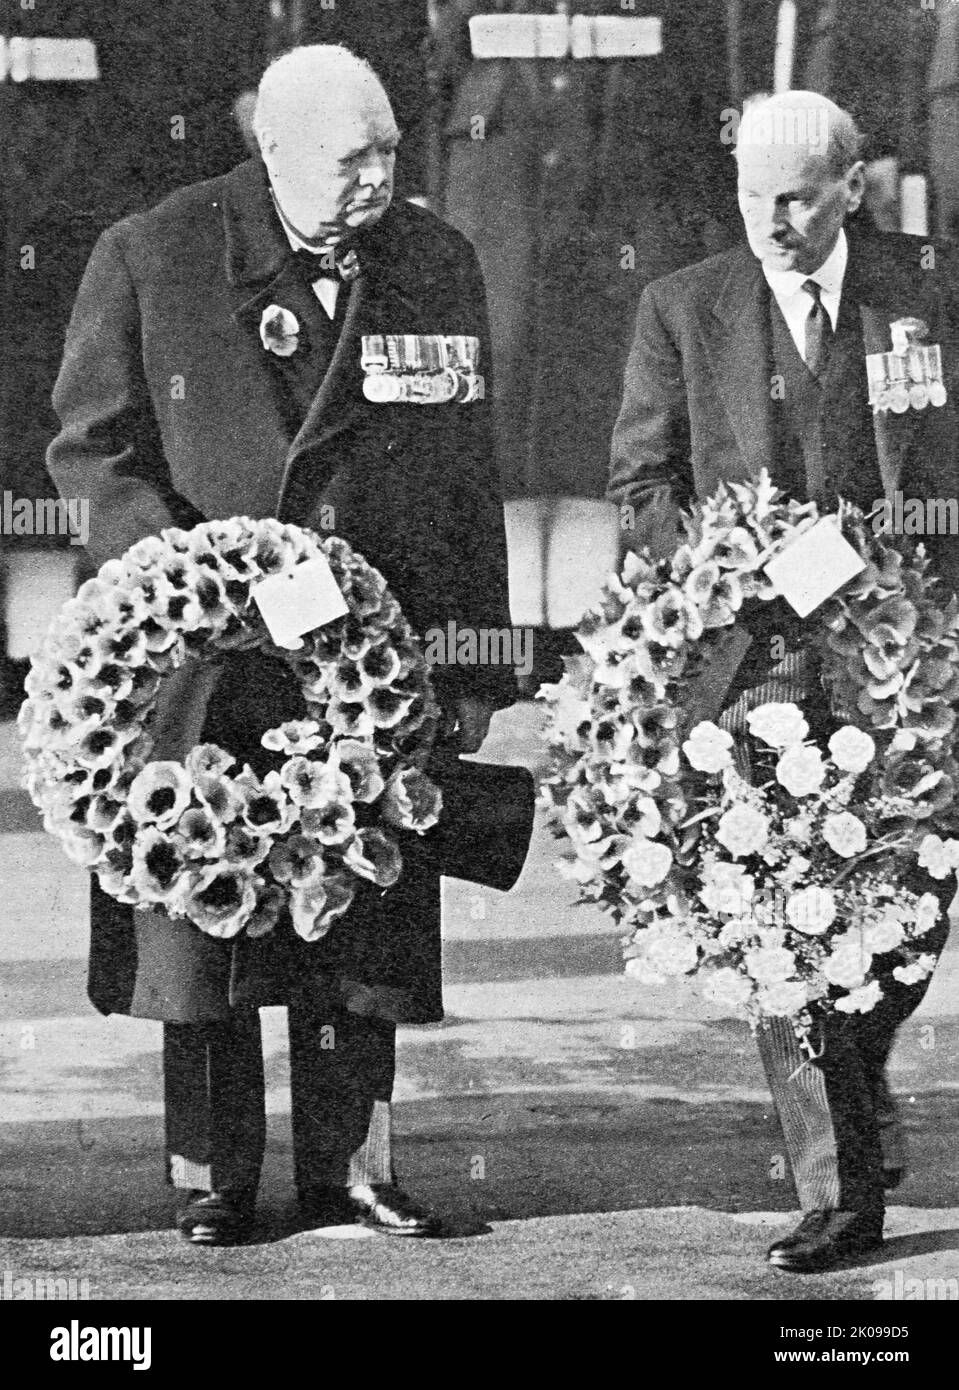 Winston Churchill and Clement Attlee laying their wreaths at The Cenotaph. Sir Winston Leonard Spencer Churchill, KG, OM, CH, TD, DL, FRS, RA (30 November 1874 - 24 January 1965) was a British statesman who served as Prime Minister of the United Kingdom from 1940 to 1945, during the Second World War, and again from 1951 to 1955. Best known for his wartime leadership as Prime Minister, Churchill was also a Sandhurst-educated soldier, a Nobel Prize-winning writer and historian, a prolific painter, and one of the longest-serving politicians in British history. Clement Richard Attlee, 1st Earl Att Stock Photo